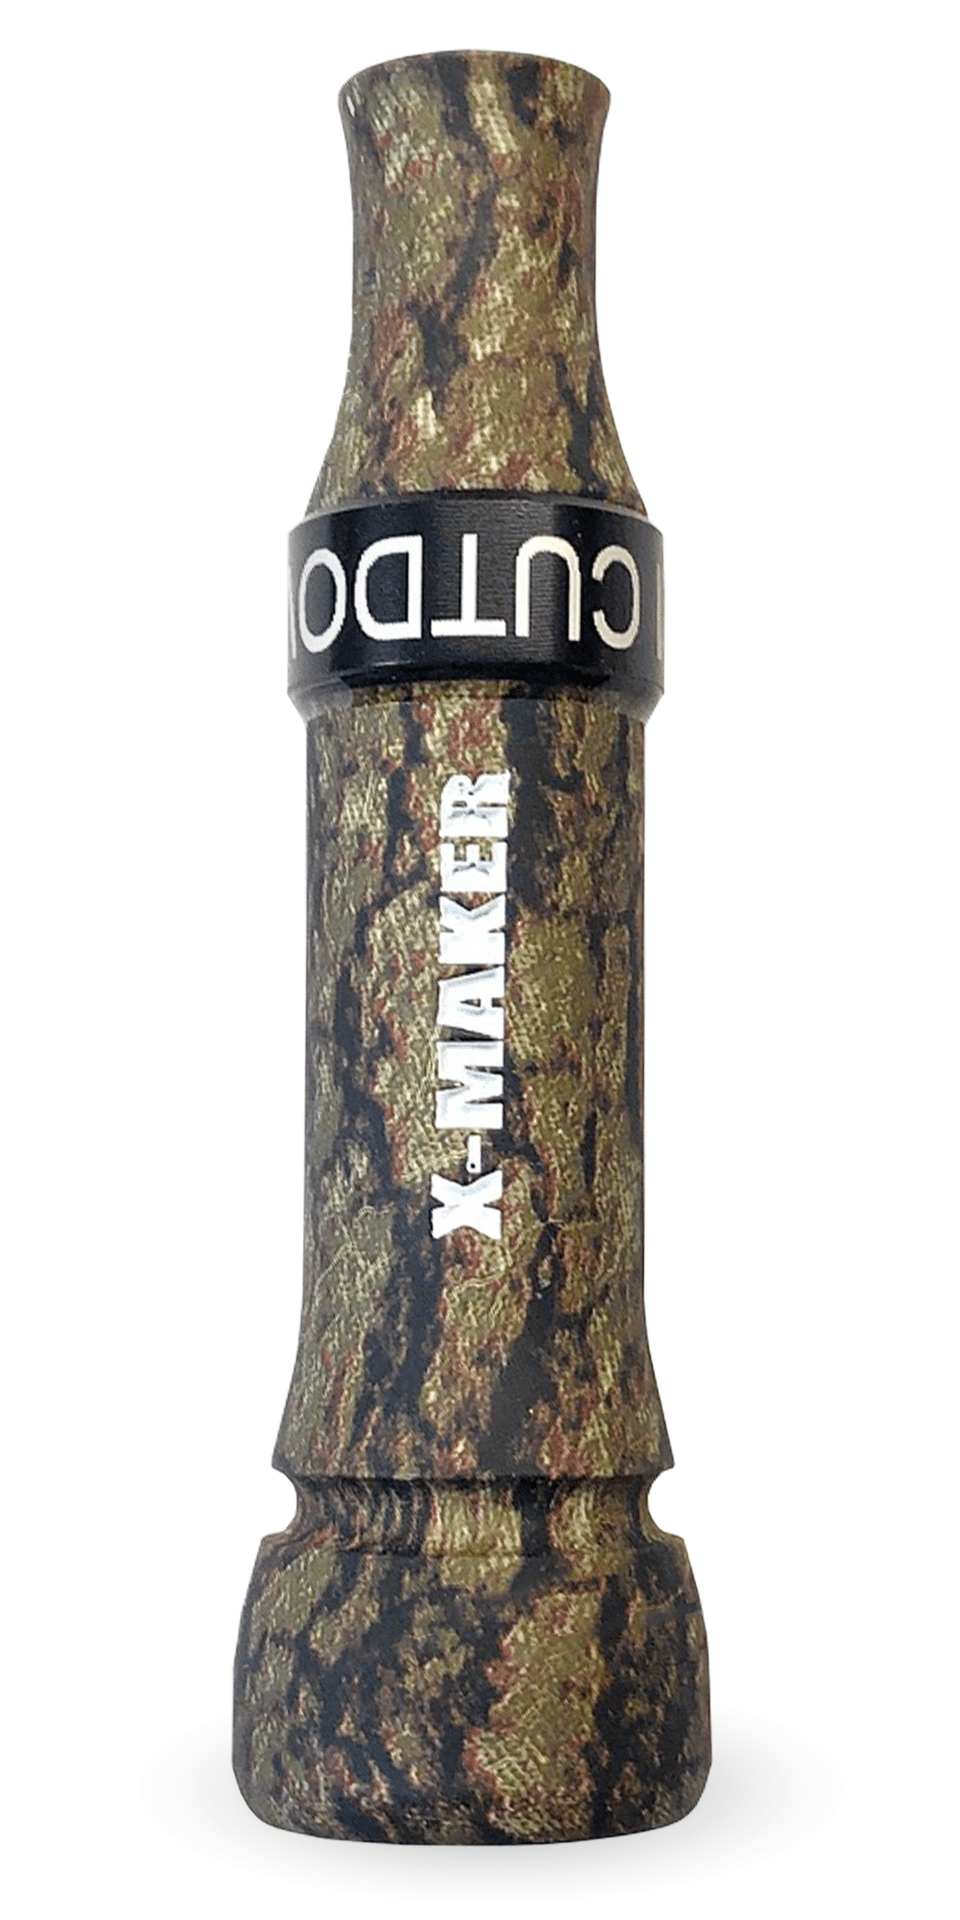 Introducing the X-MAKER Ultimate Camo Duck Call with a Plain Black Band Elevate your duck hunting experience with the X-MAKER Ultimate Camo Duck Call, featuring a Plain Black Band and innovative Threaded Flared Keyhole design. Crafted on the great Mississippi flyway in Arkansas, this call embodies precision and craftsmanship, meticulously designed and hand-tuned by the renowned Kirk McCullough. Key Features: Exceptional Craftsmanship: Each call is meticulously designed, cut, and hand-tuned by Kirk McCullough, ensuring superior performance and reliability. American-Made Quality: Proudly crafted in the USA from durable hard cast acrylic, this call blends robustness with exceptional sound quality. Responsive Performance: Engineered to produce excellent high and low tones with a loud, smooth sound, making it highly effective in any hunting scenario. User-Friendly Design: Suitable for hunters of all skill levels, this call is easy to use and delivers realistic quacks that effortlessly attract ducks. Prepare to dominate the field, whether in a blind or flooded timber, with the X-MAKER Ultimate Camo Duck Call. Experience the unmatched precision and craftsmanship that make this call the ultimate choice for dedicated duck hunters.